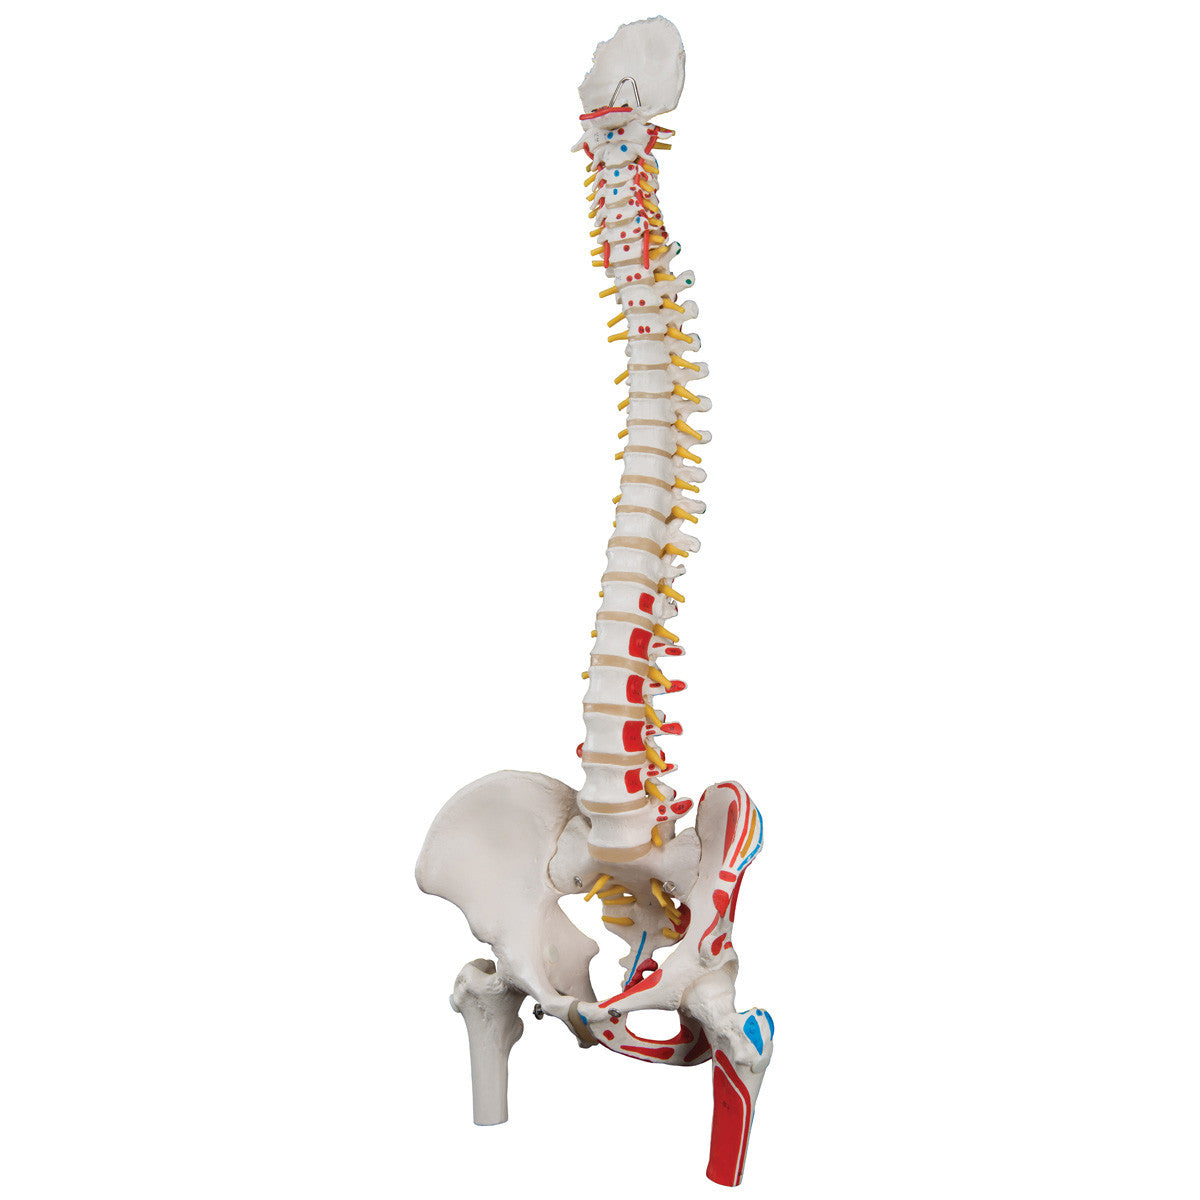 a58-3_03_1200_1200_classic-human-flexible-spine-model-with-femur-heads-painted-muscles-3b-smart-anatomy__64831.1589753011.1280.1280.jpg